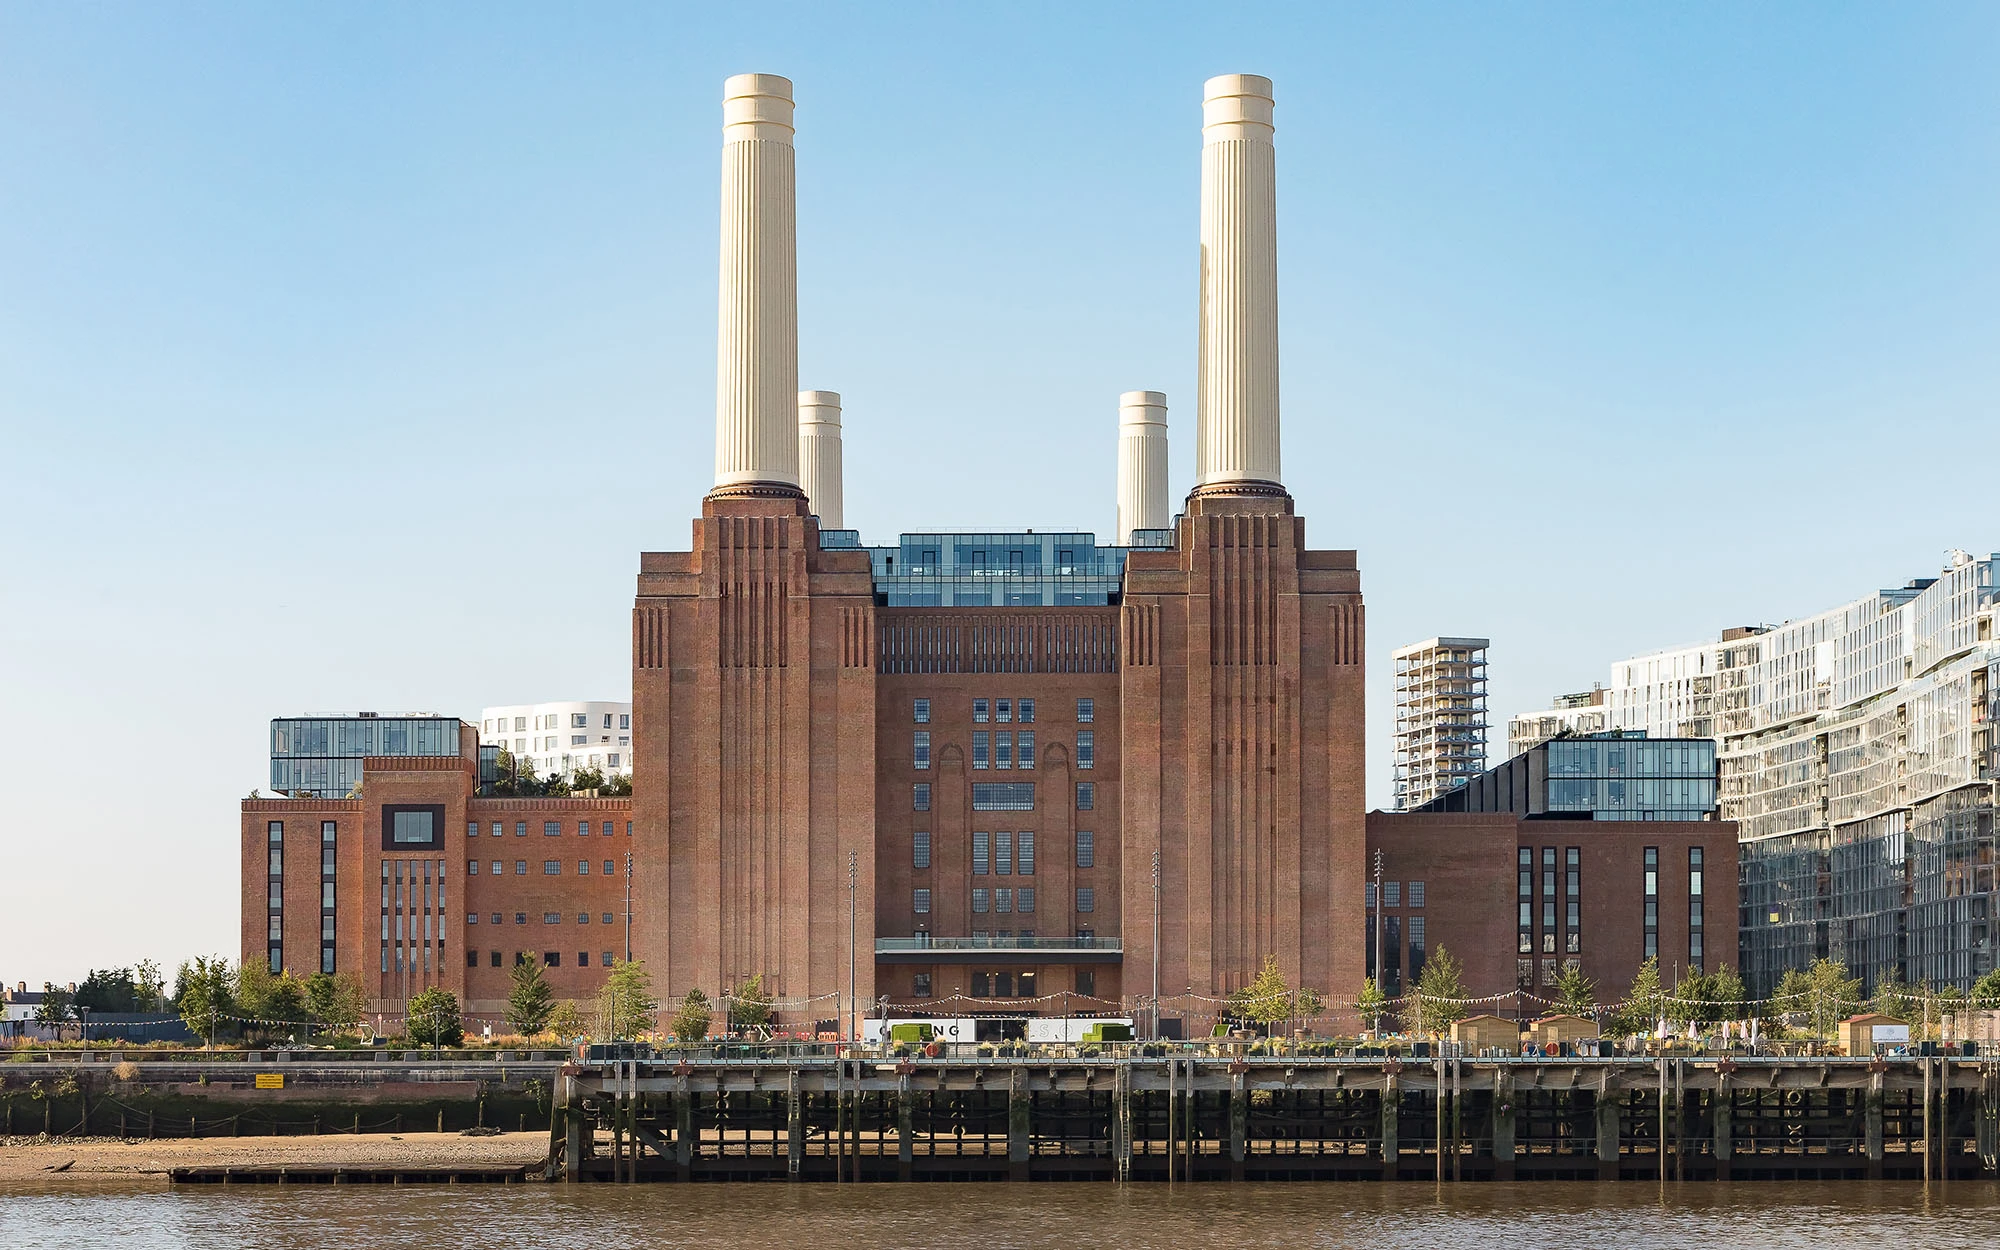 Battersea Power Station from across the river